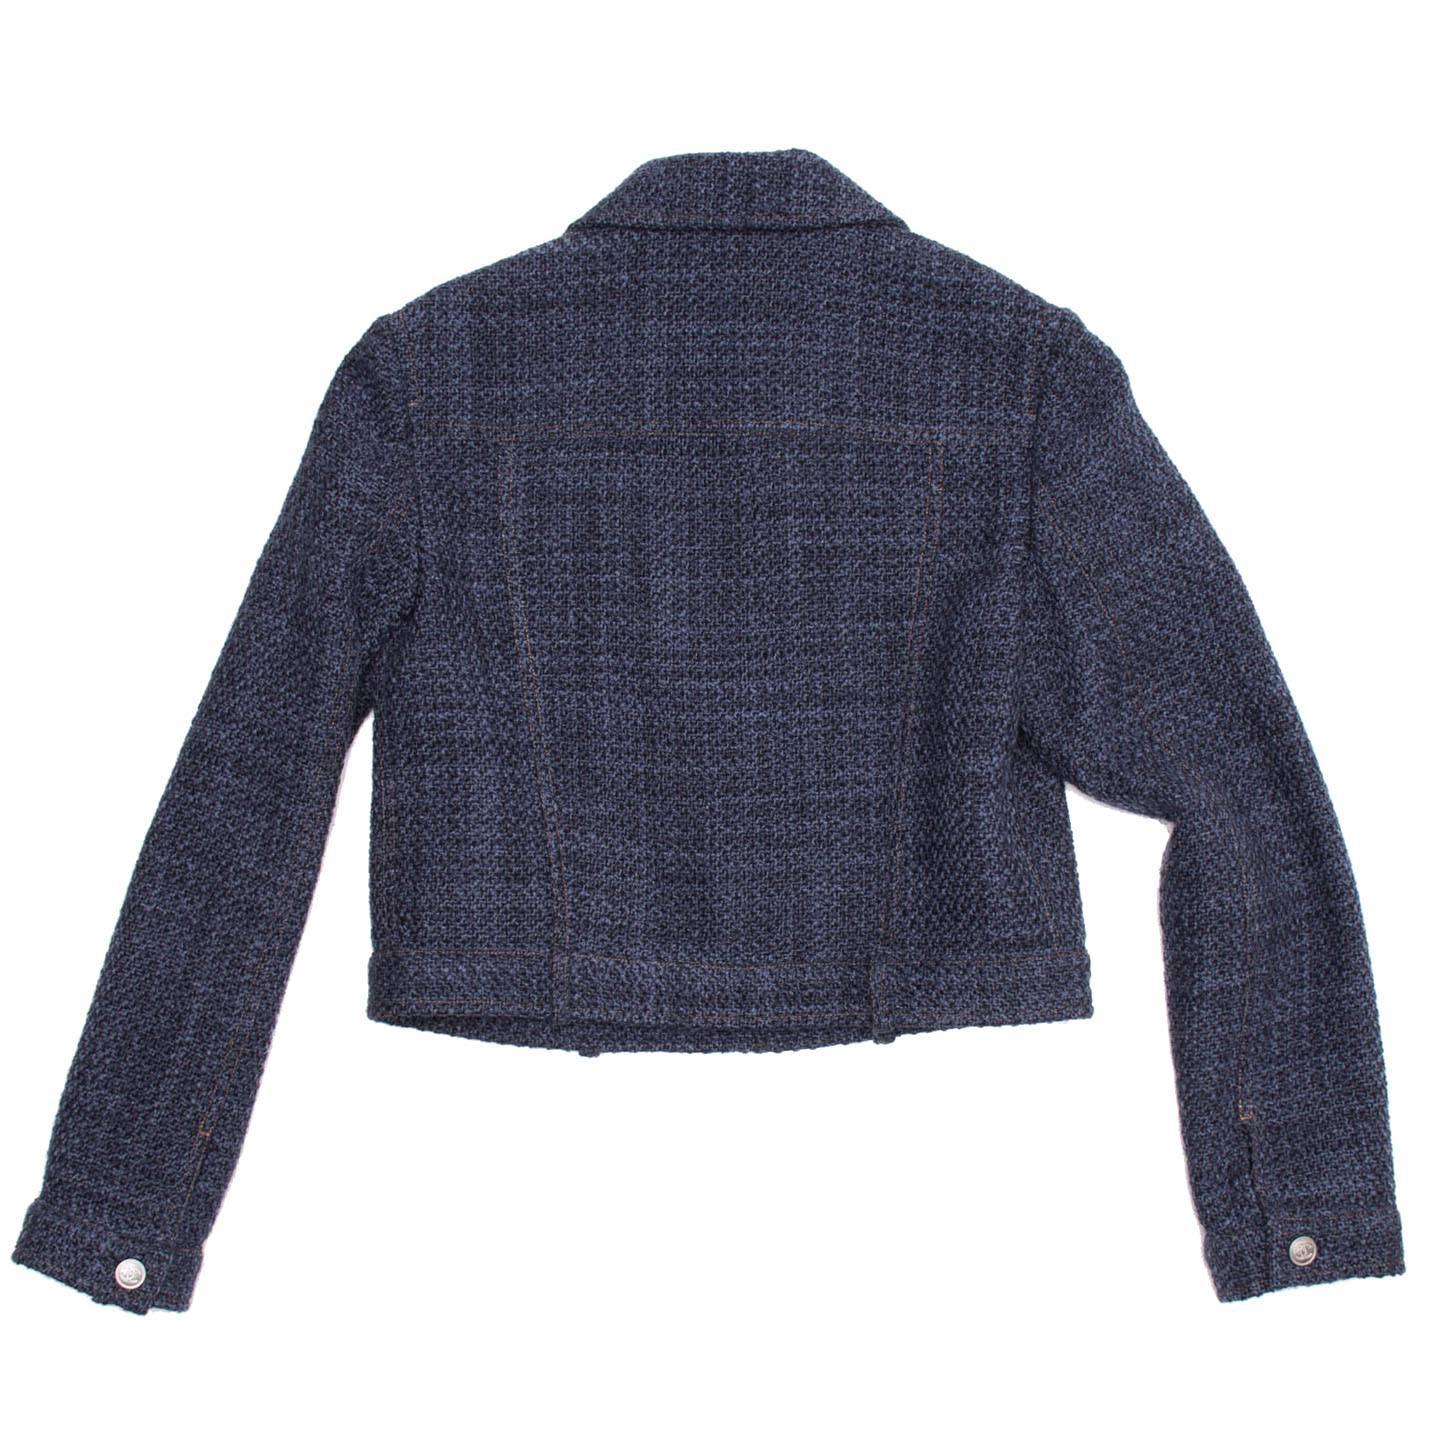 Indigo wool blend tweed cropped trucker style jacket with two patch pockets with flaps fastened by Chanel logo metal snap buttons. The same brushed silver metal buttons close the center front and the cuffs, while the hem is enriched by a jeans style